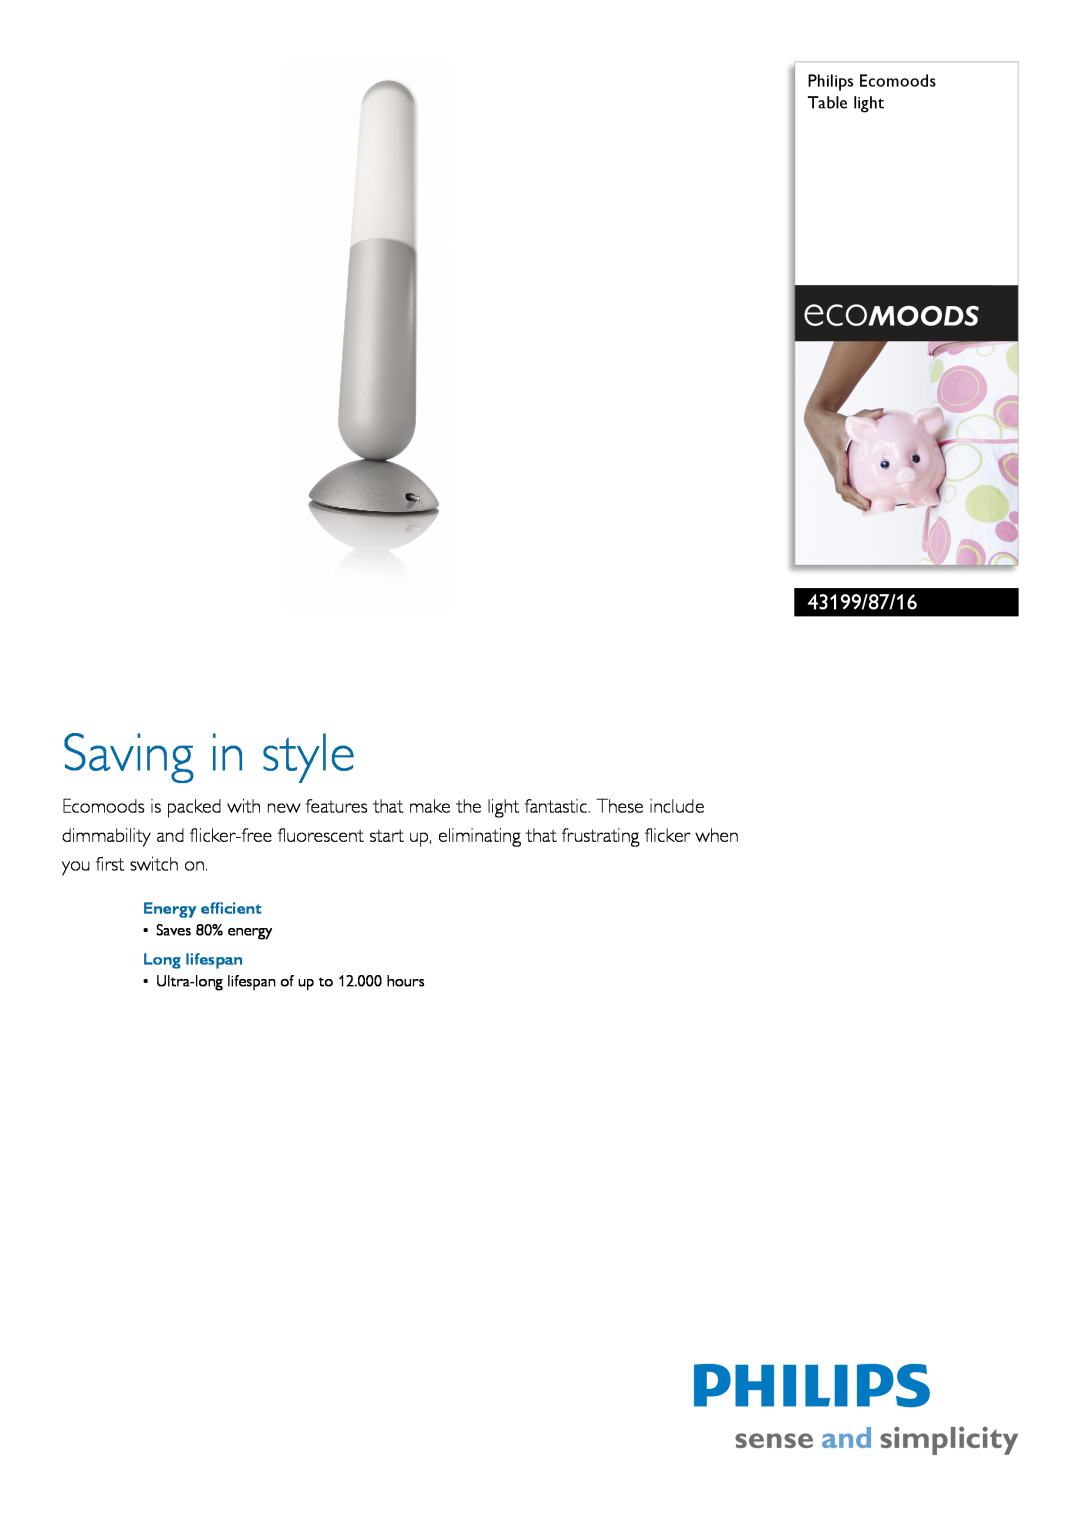 Philips 43199/87/16 manual Philips Ecomoods Table light, Energy efficient, Long lifespan, Saving in style 